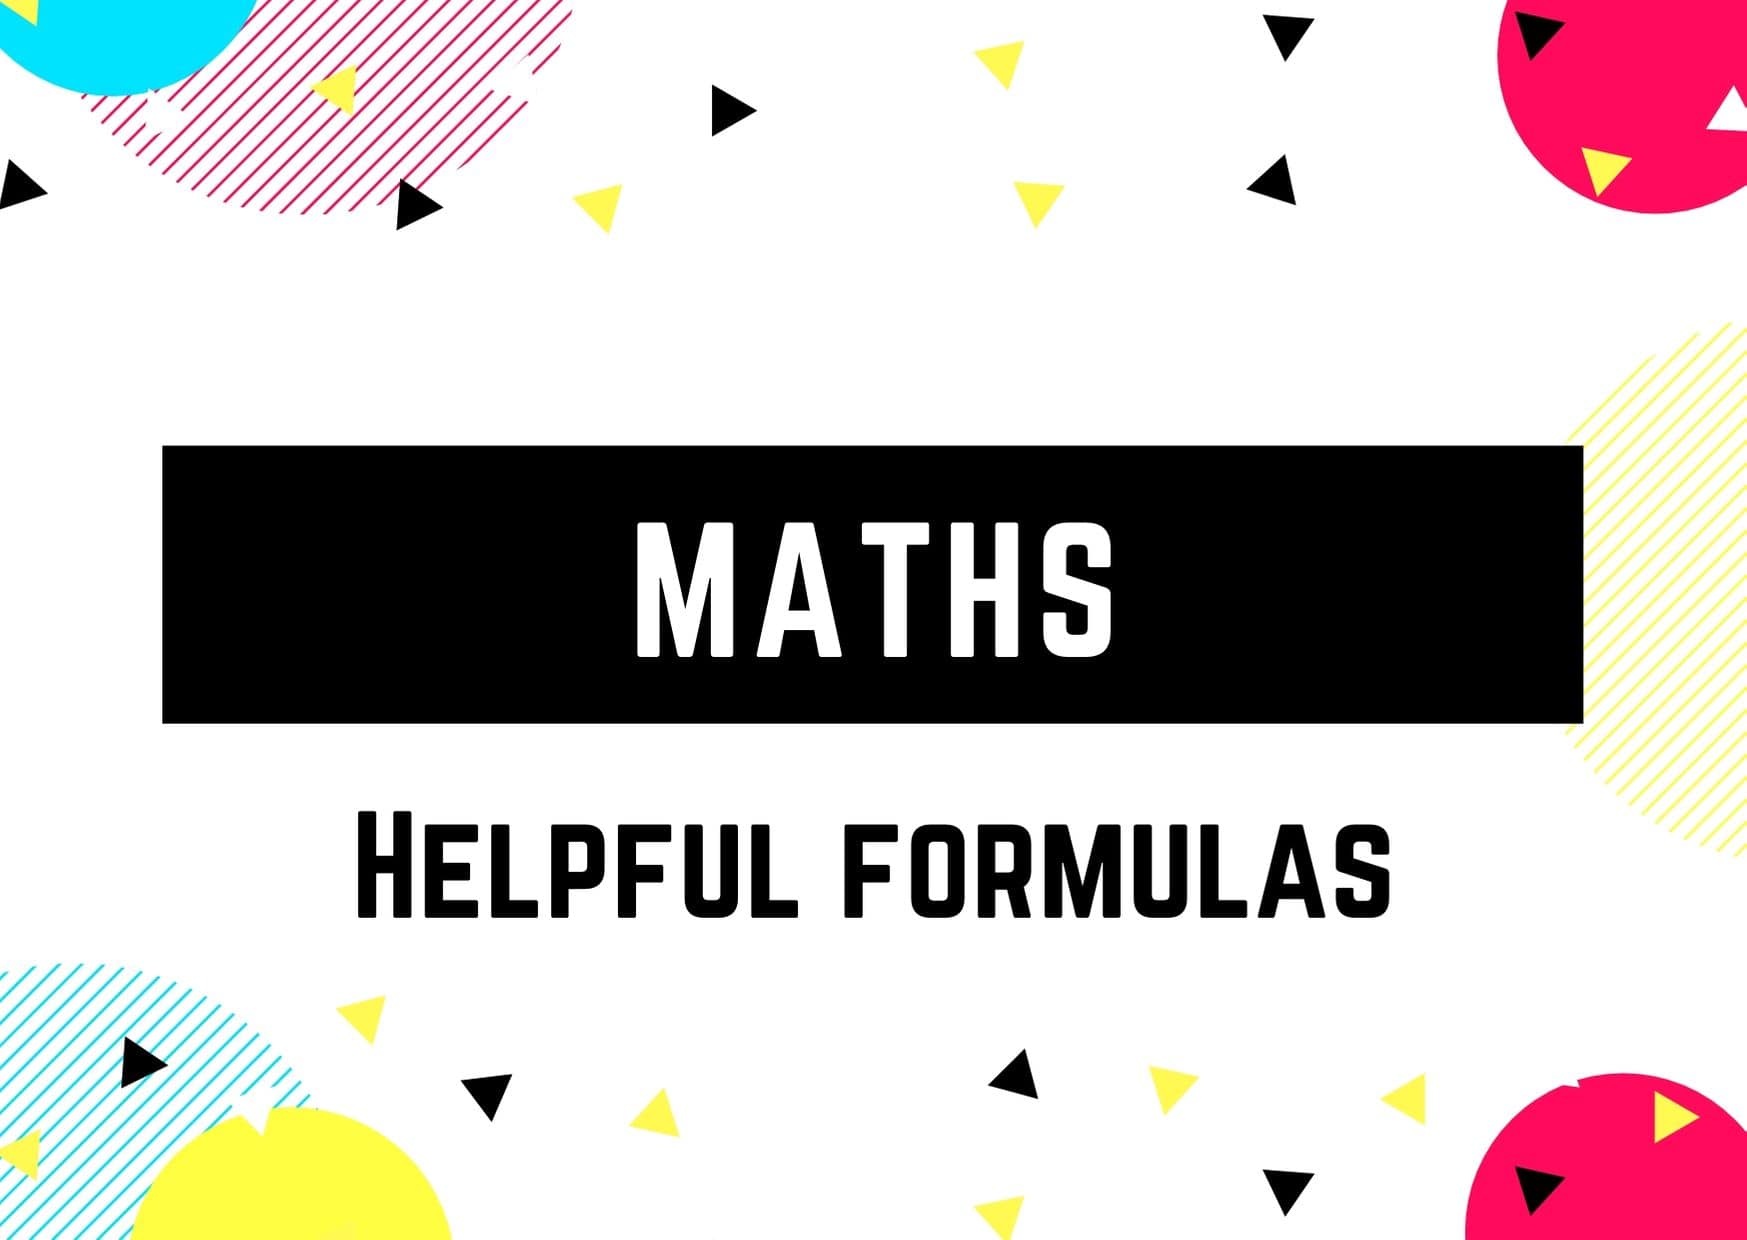 You are currently viewing Mathematics – Helpful Formulas